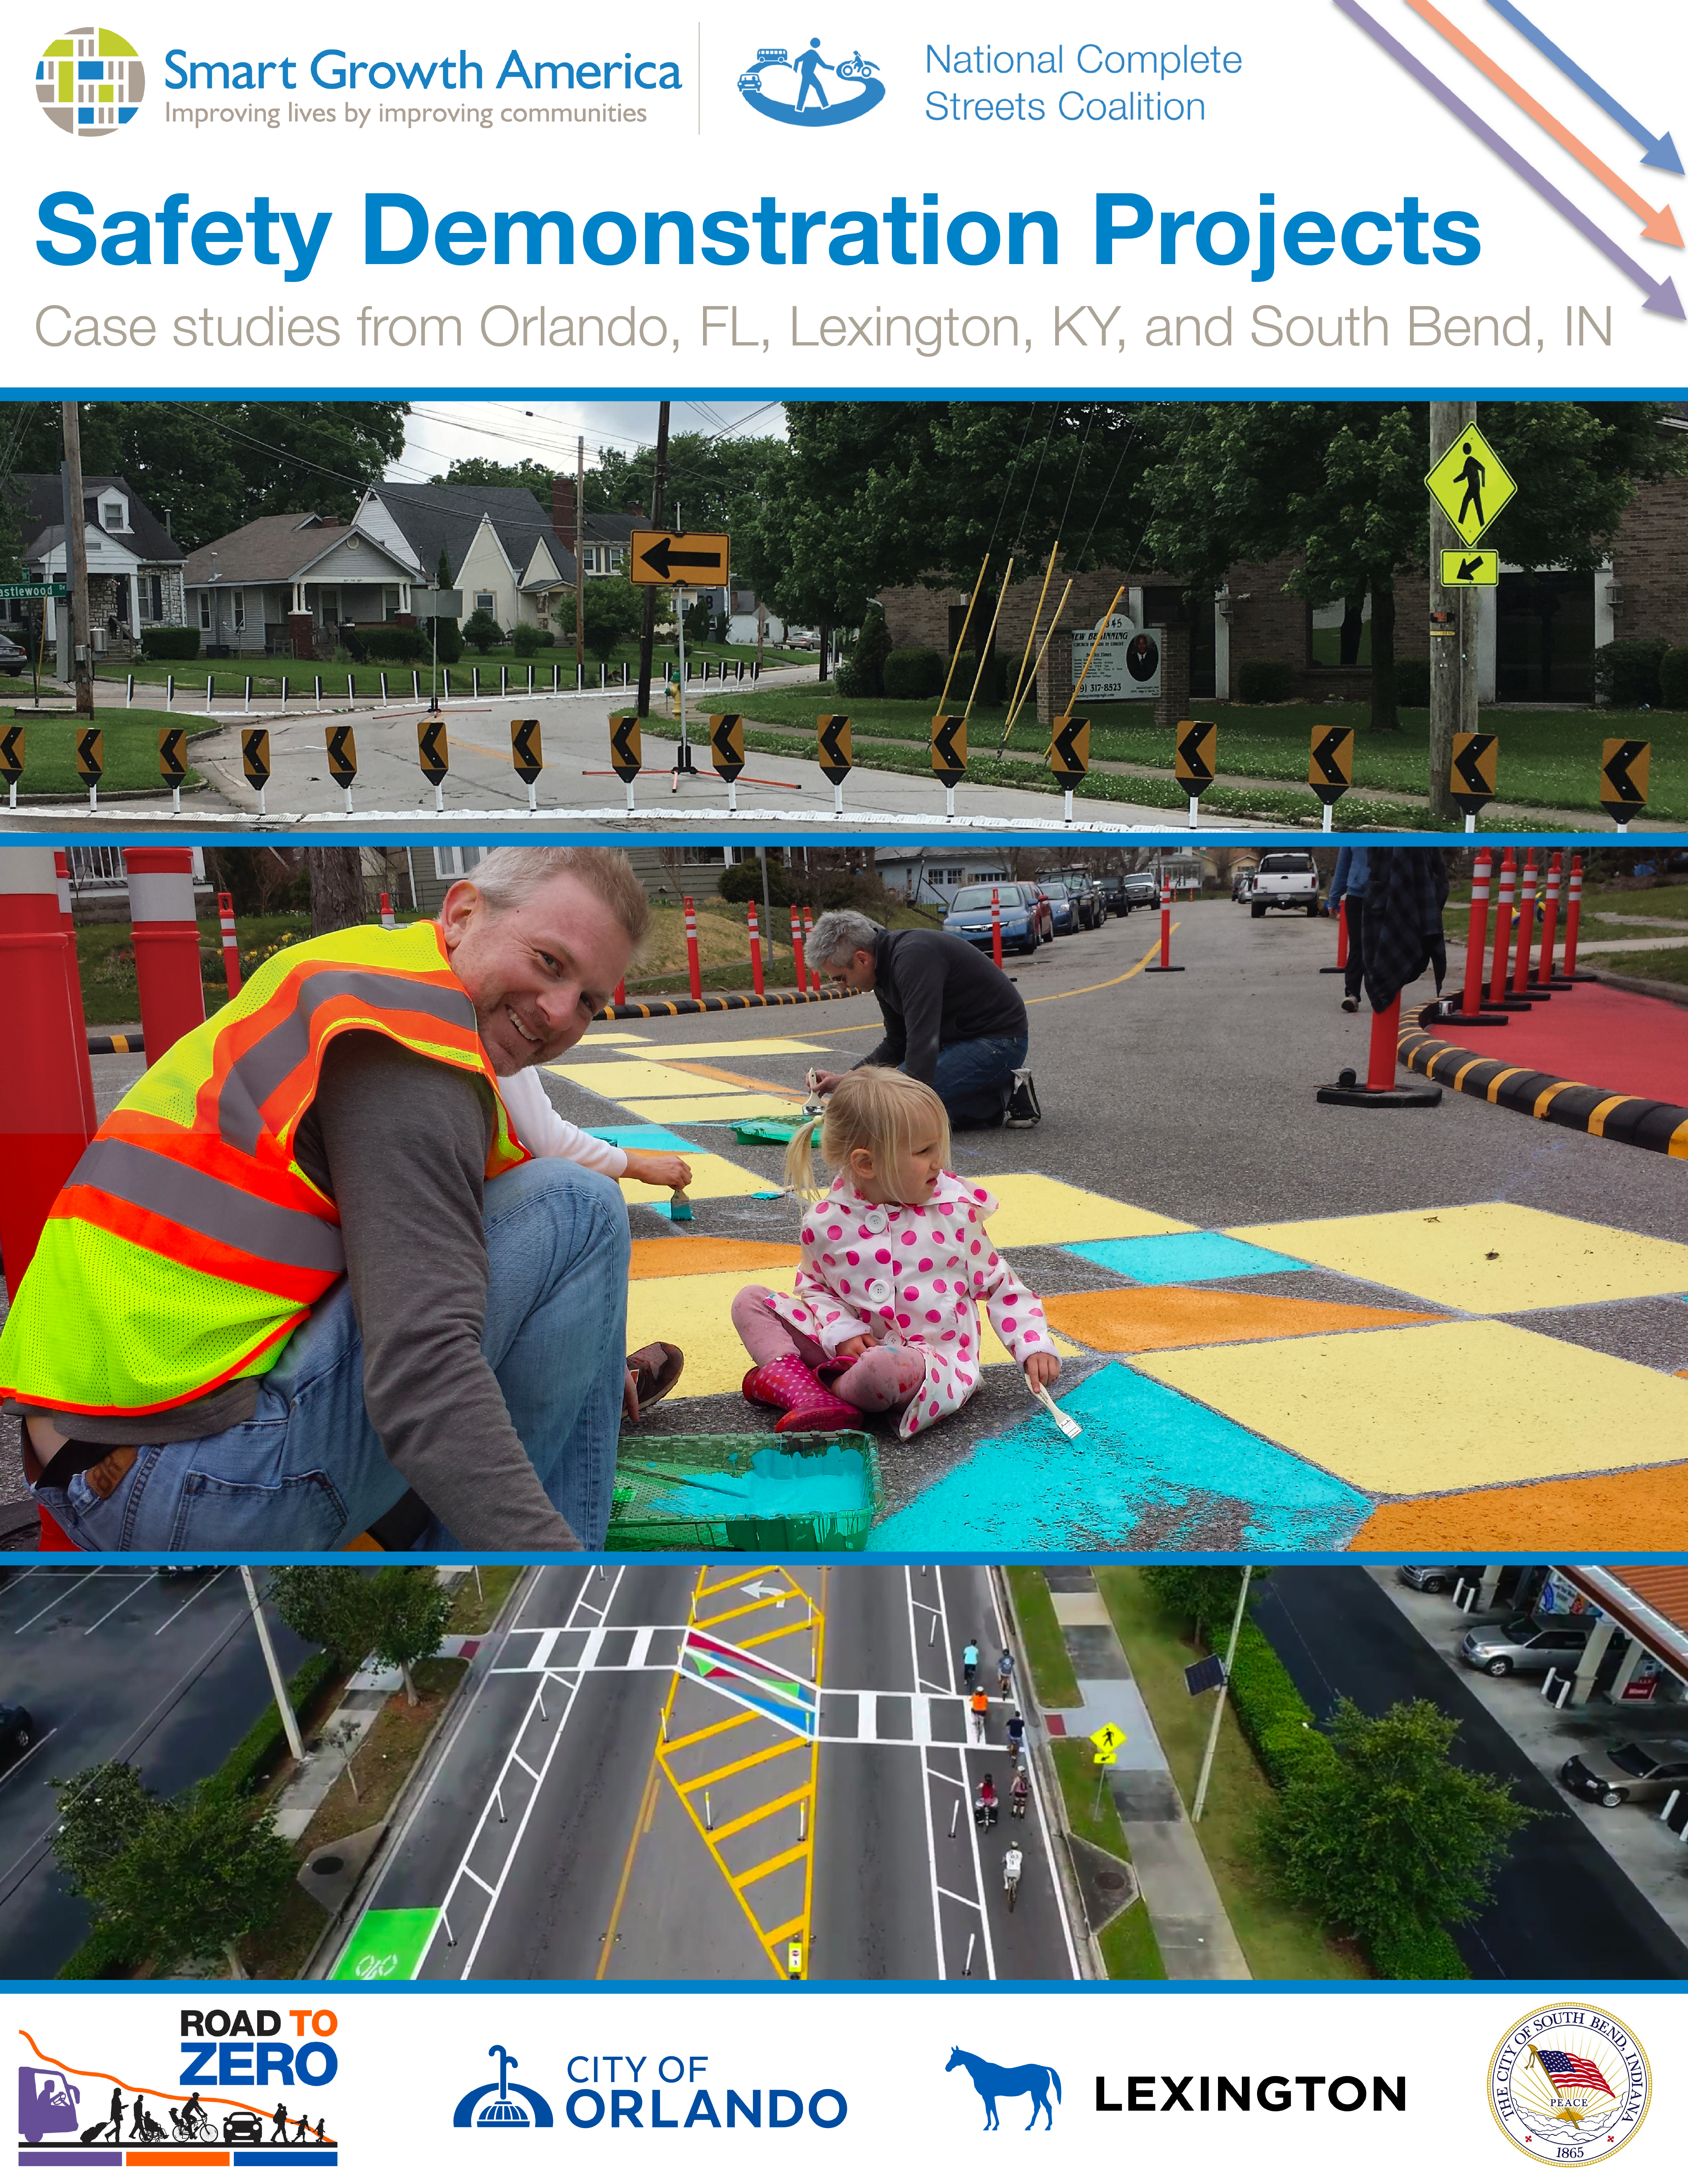 Safety Demonstration Projects: Case studies from Orlando, FL, Lexington, KY, and South Bend, IN